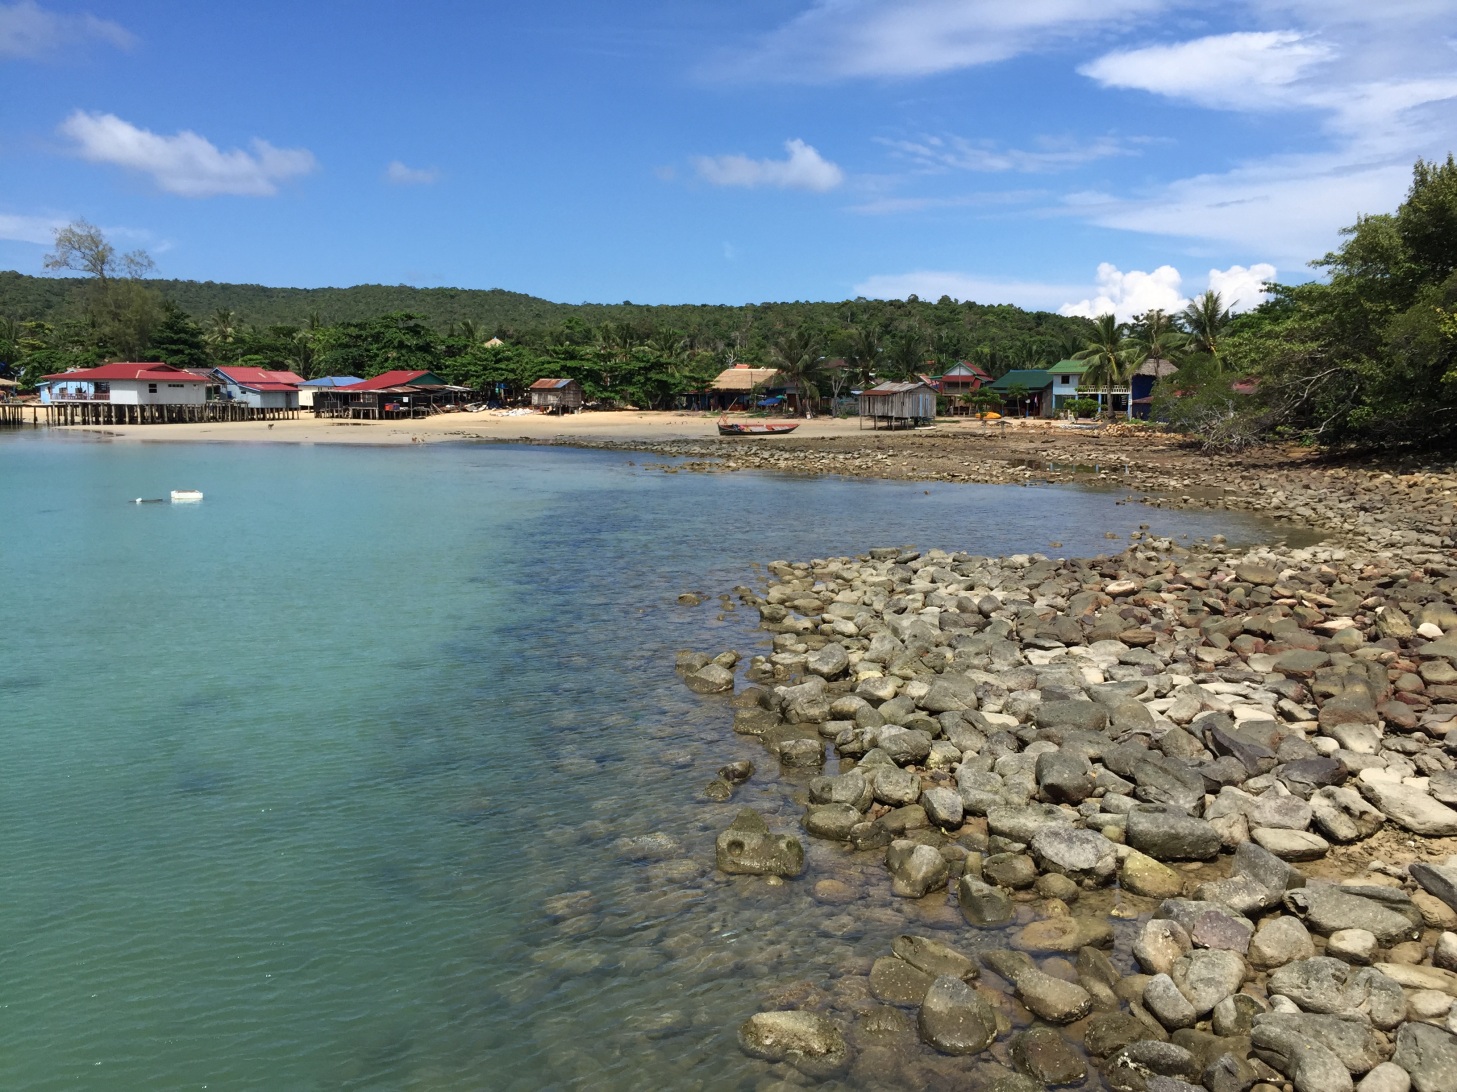 A rocky beach, clear blue water, several small houses on stilts in the background, and short island forest beyond